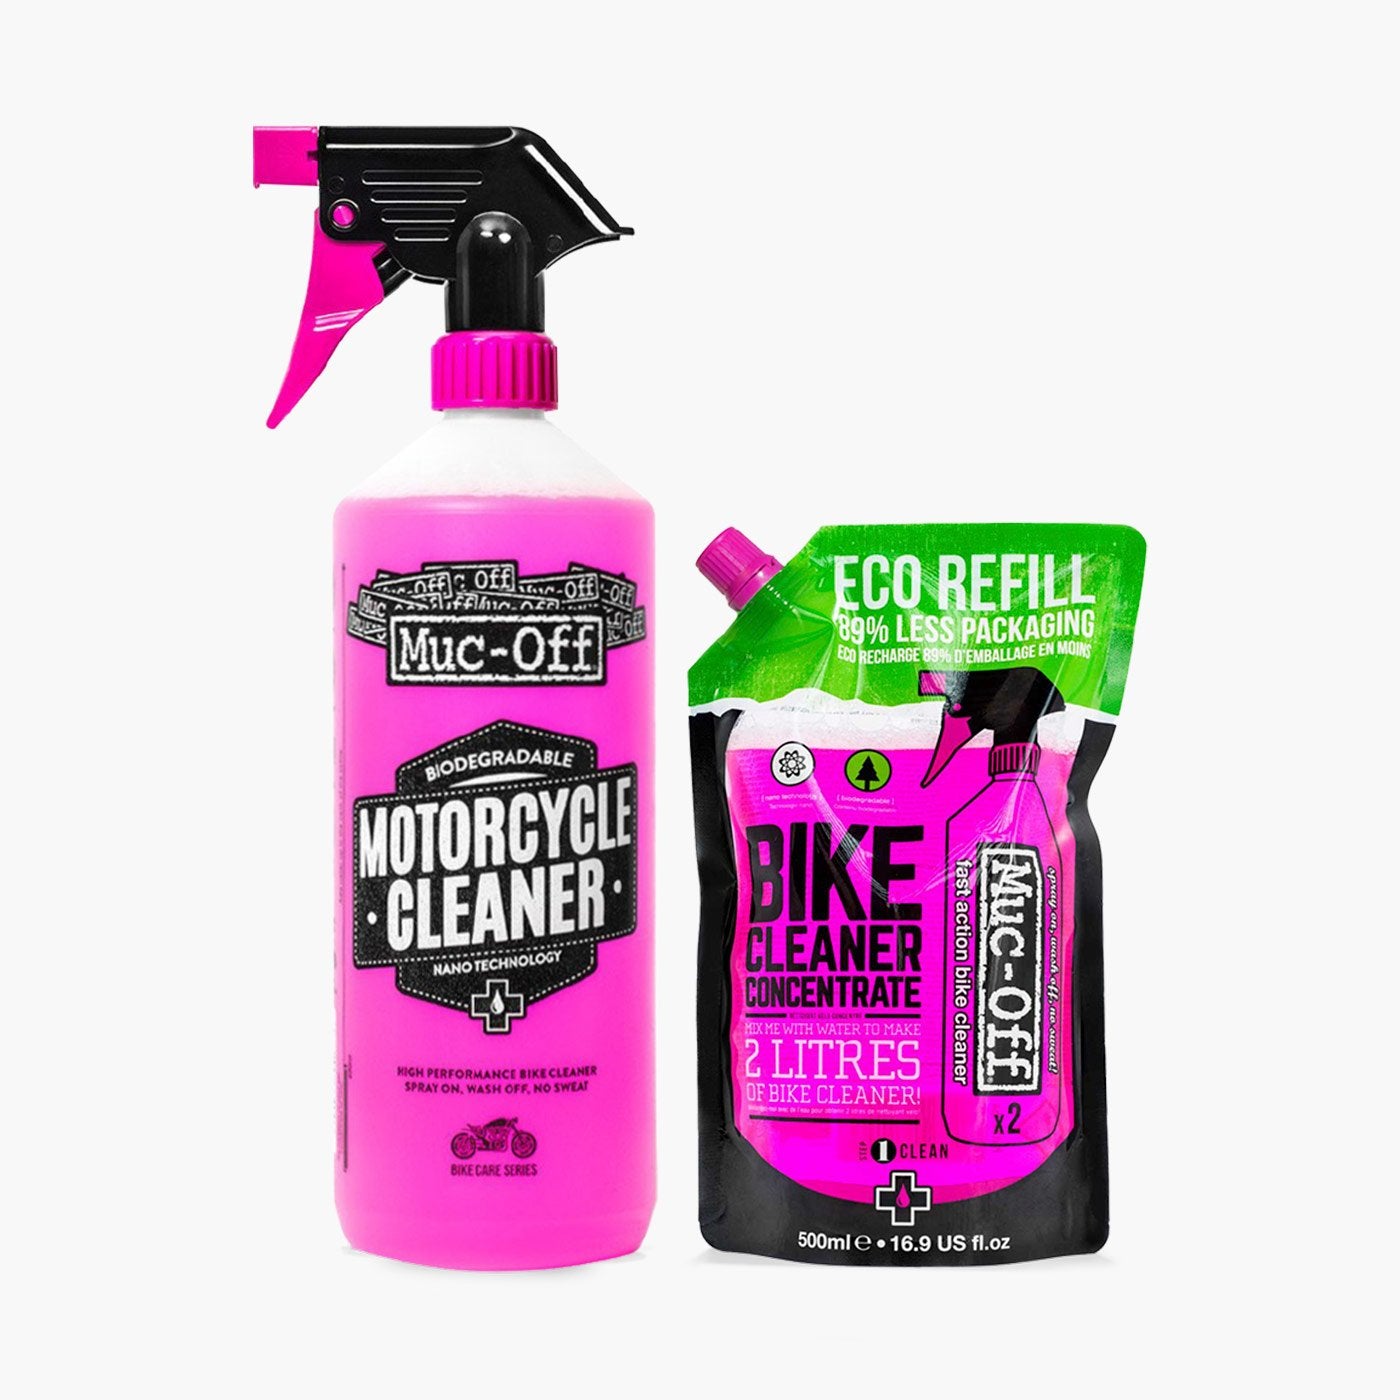 Motorcycle Cleaning & Bike Care